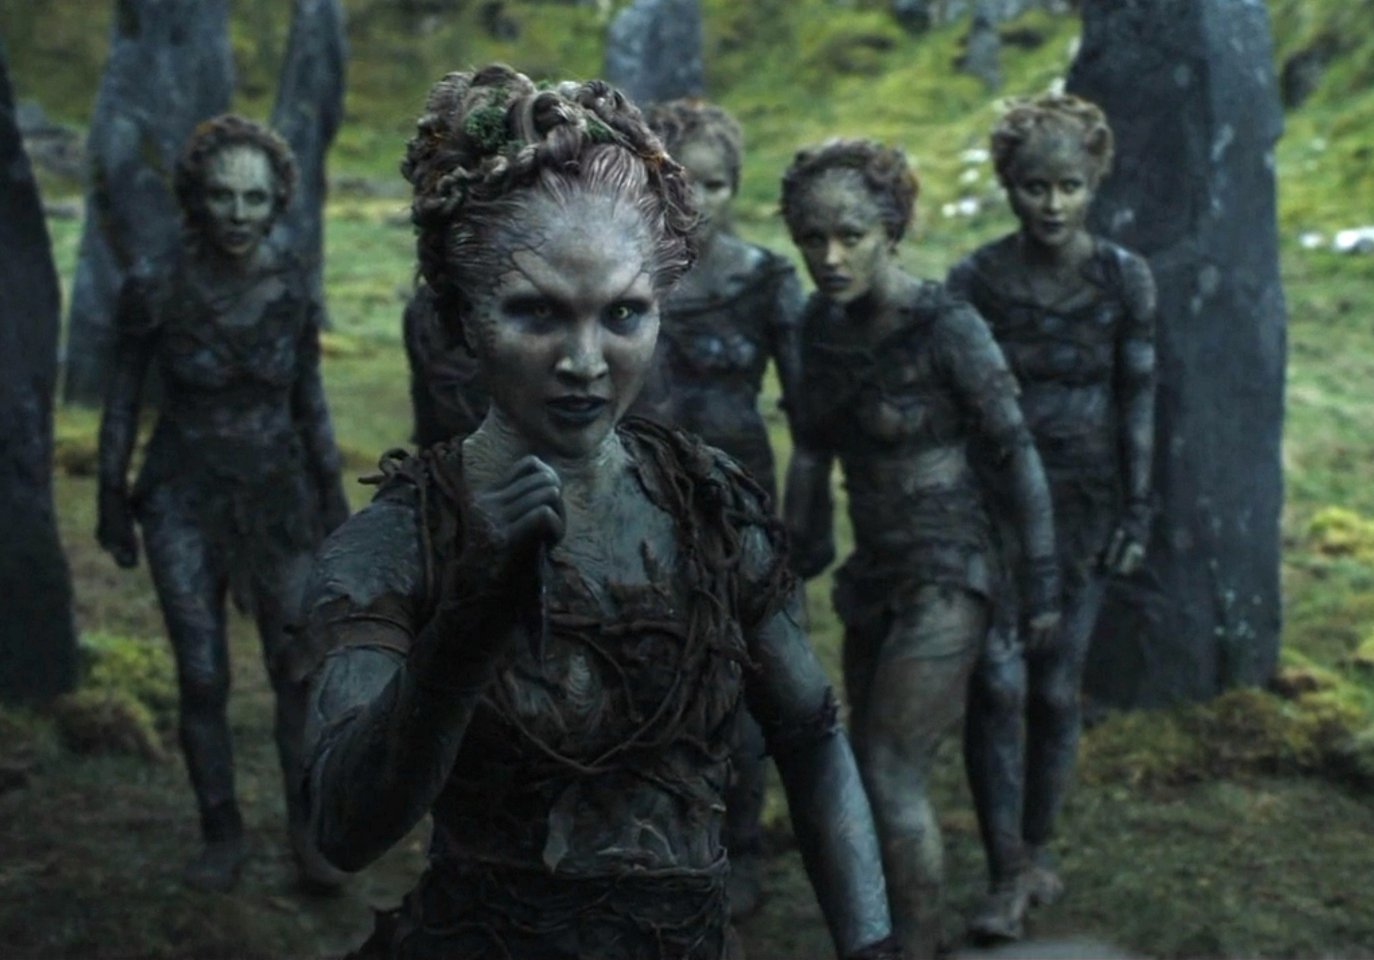 The Children of the Forest uit Game of Thrones